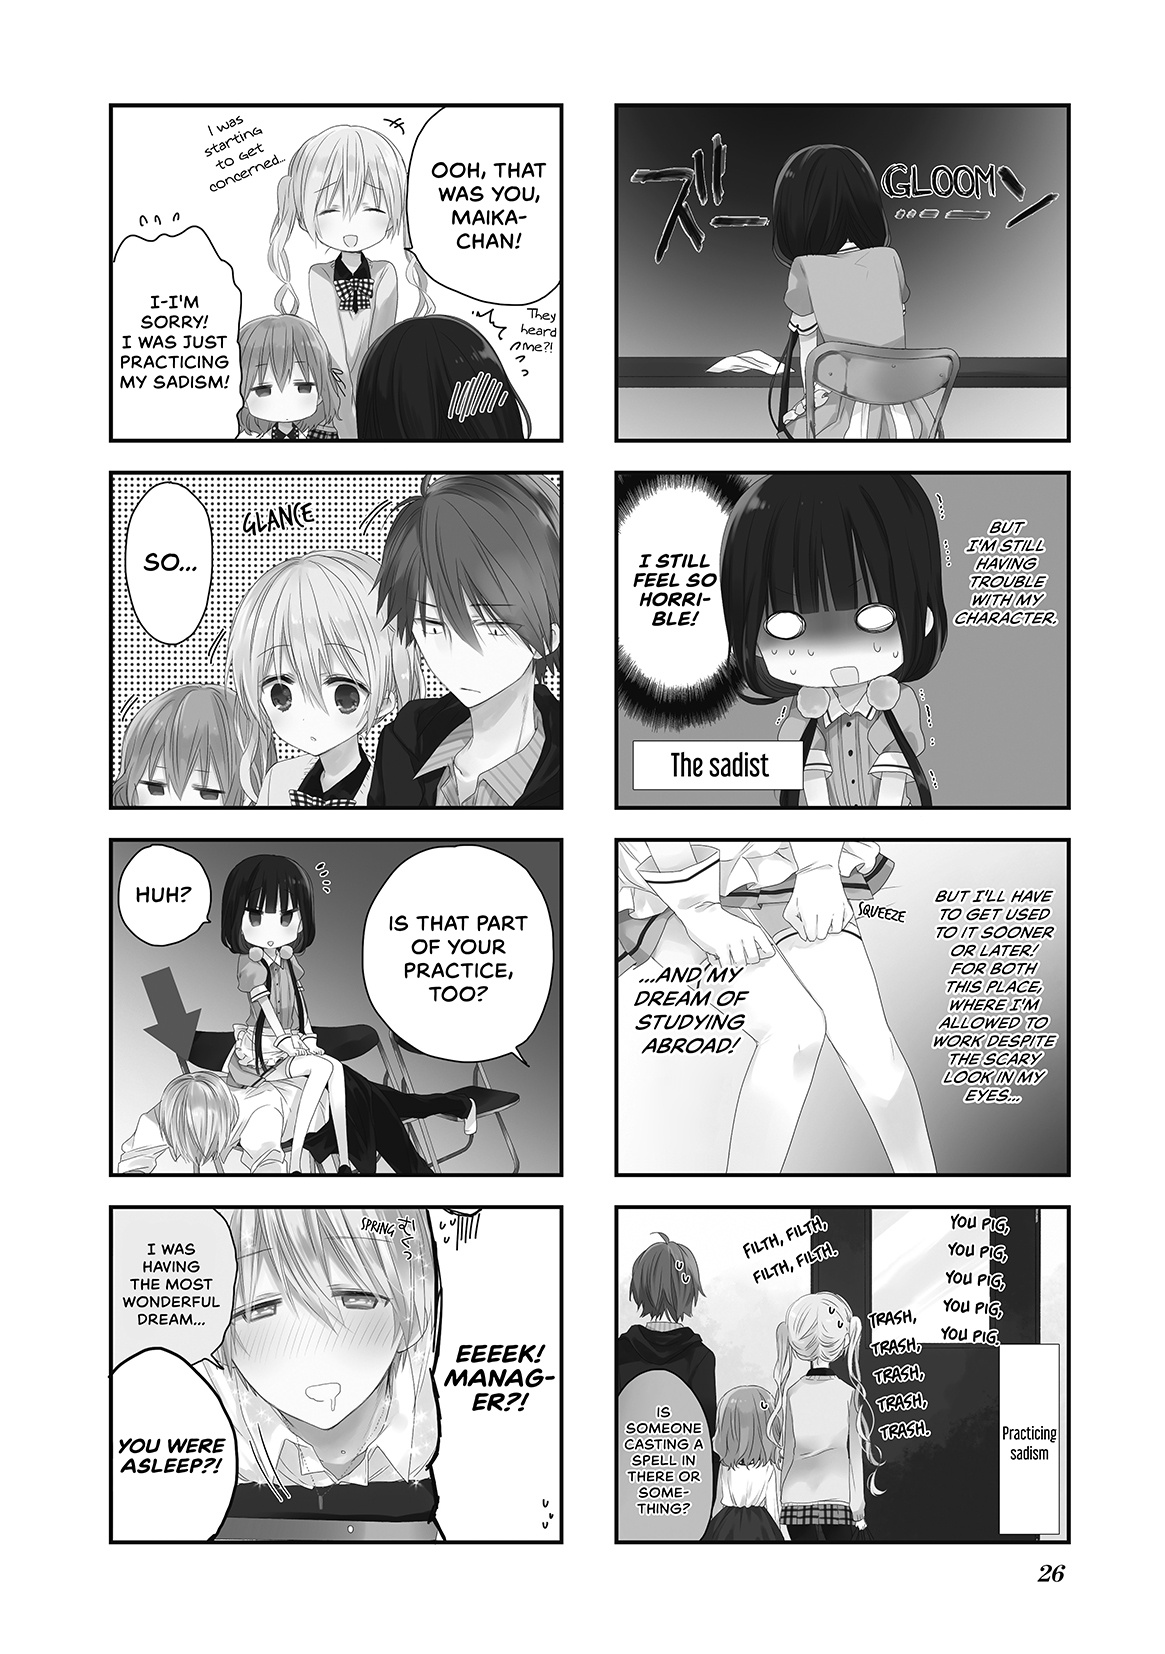 Blend-S - Page 2